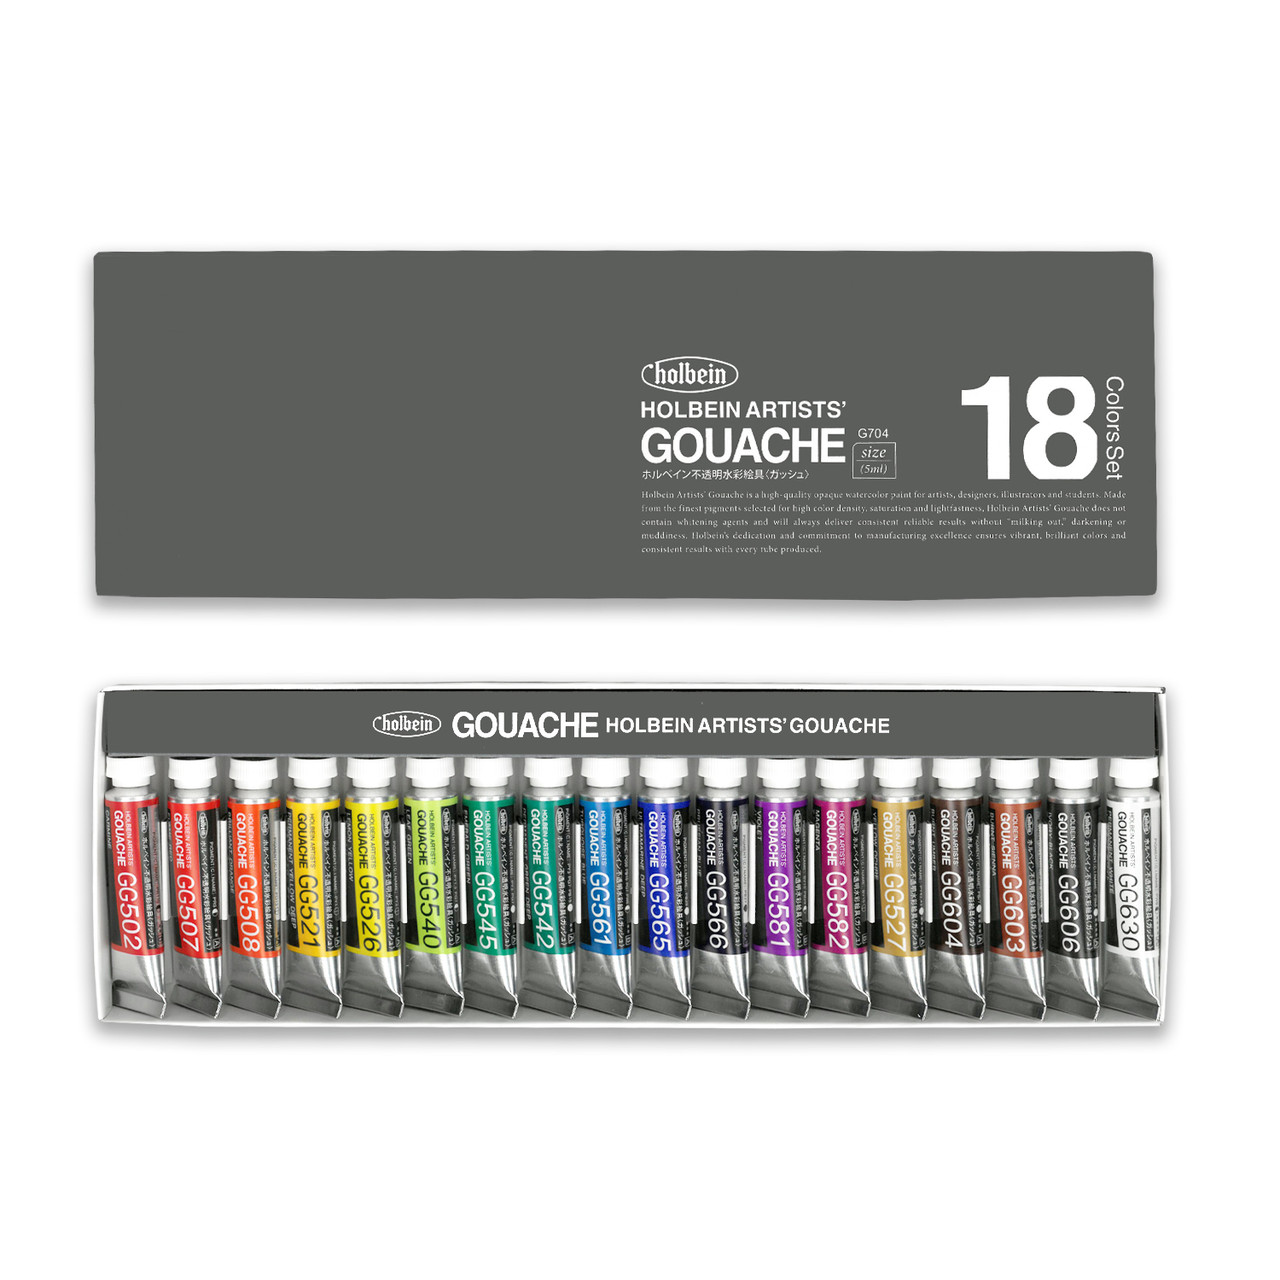 Holbein Artists' Watercolor - Set of 18 5 ml